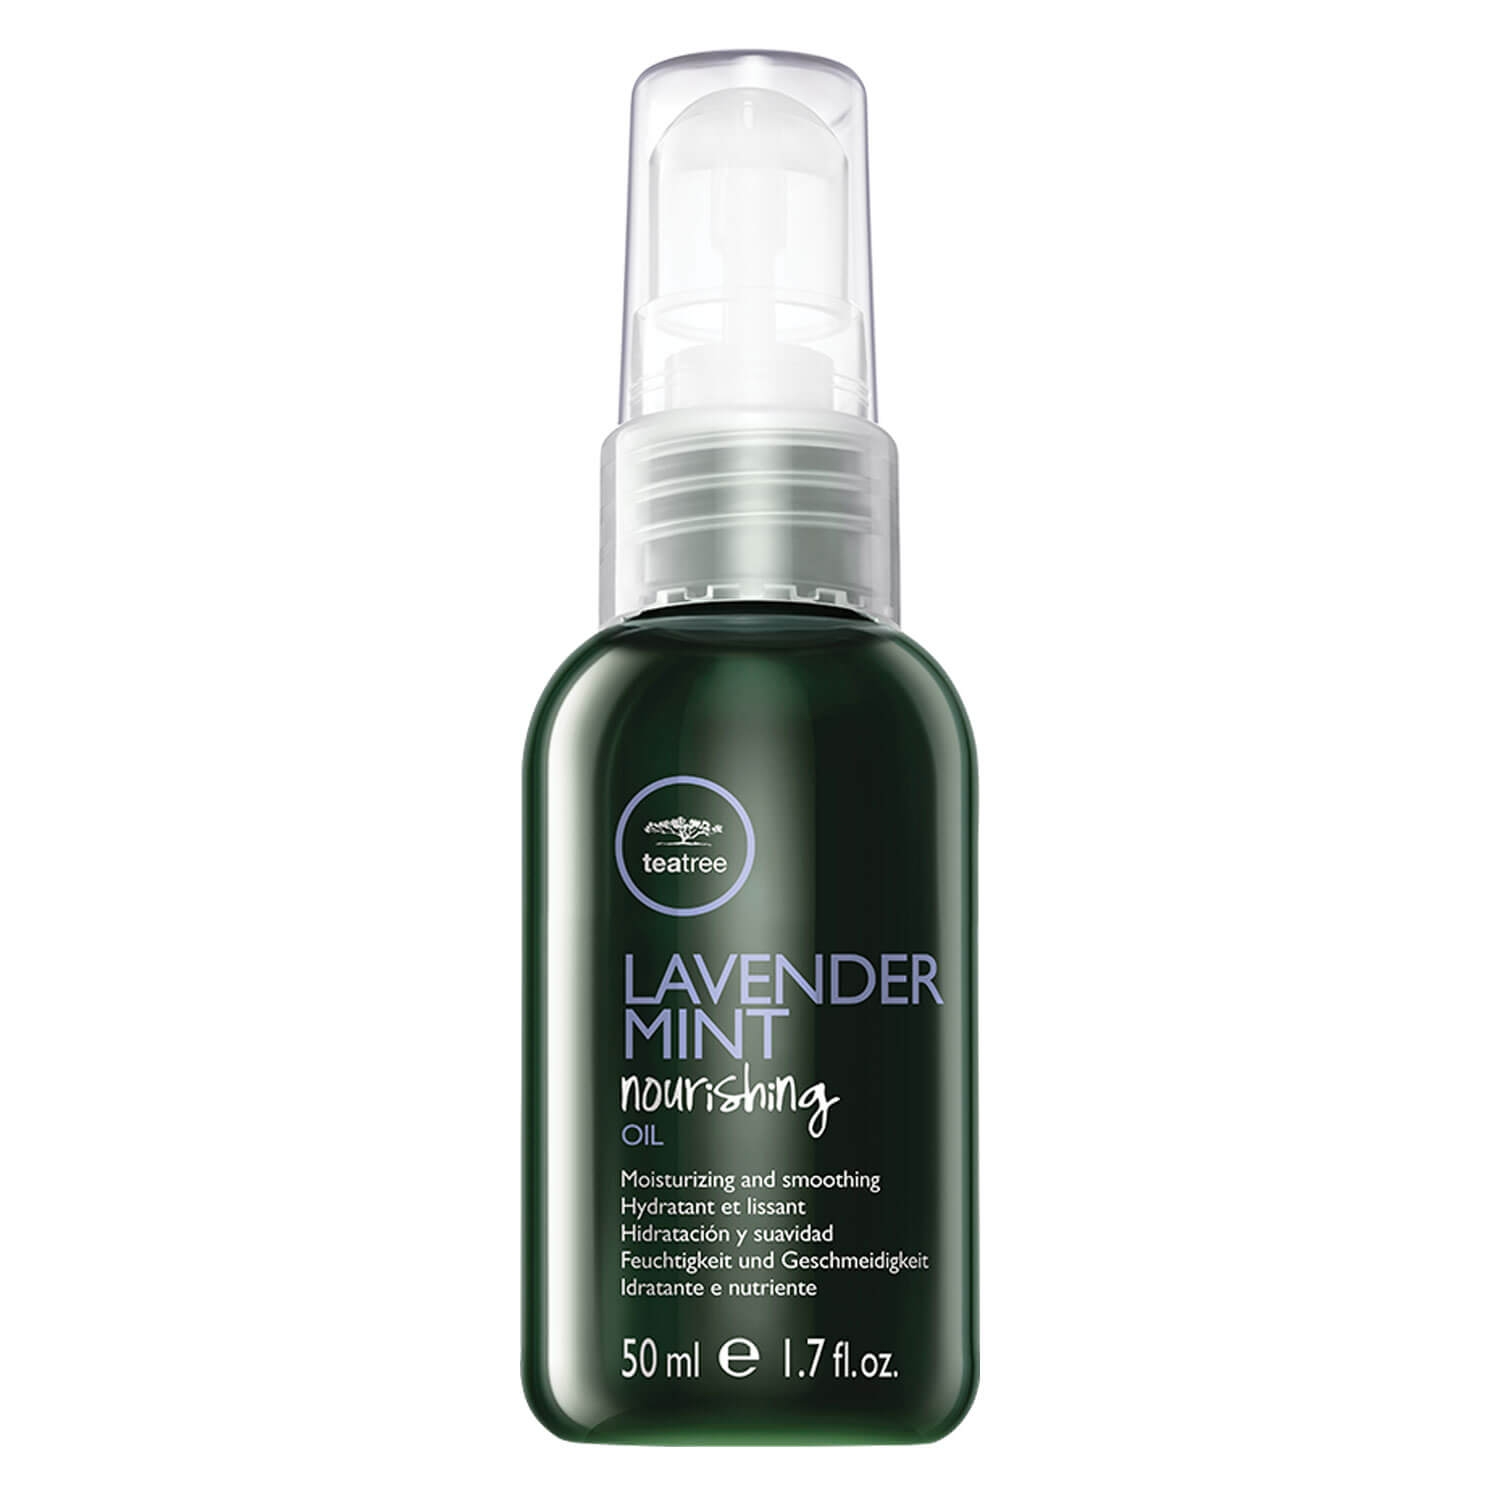 Product image from Tea Tree Lavender Mint - Nourishing Oil